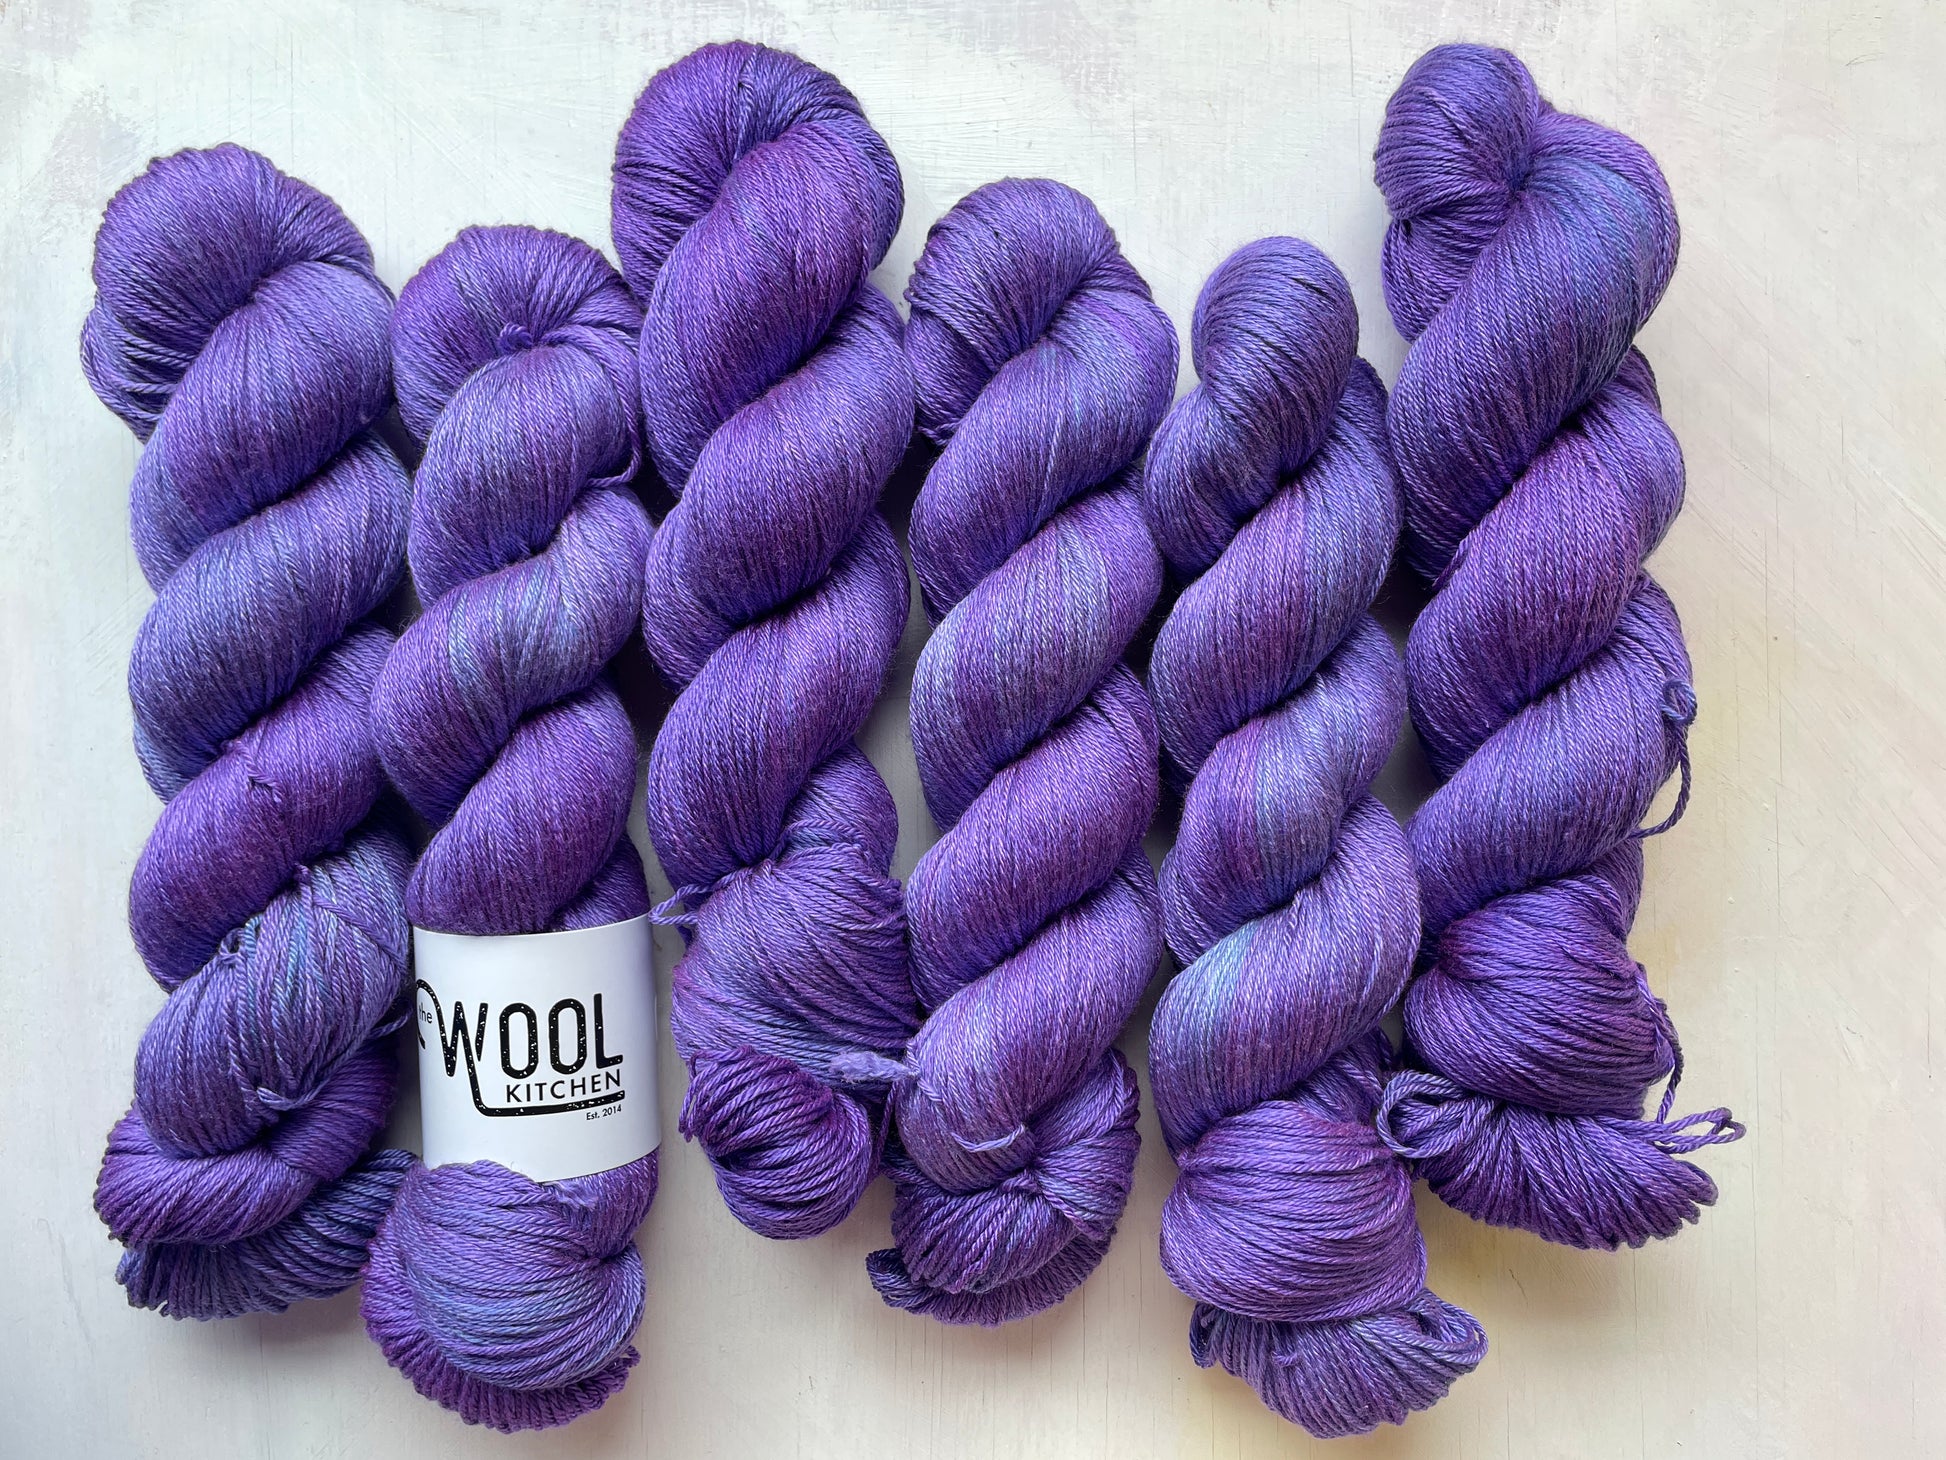 Violet Crush from the Luxury 4ply Merino Silk Collection by the hand dyed yarn expert, The Wool Kitchen